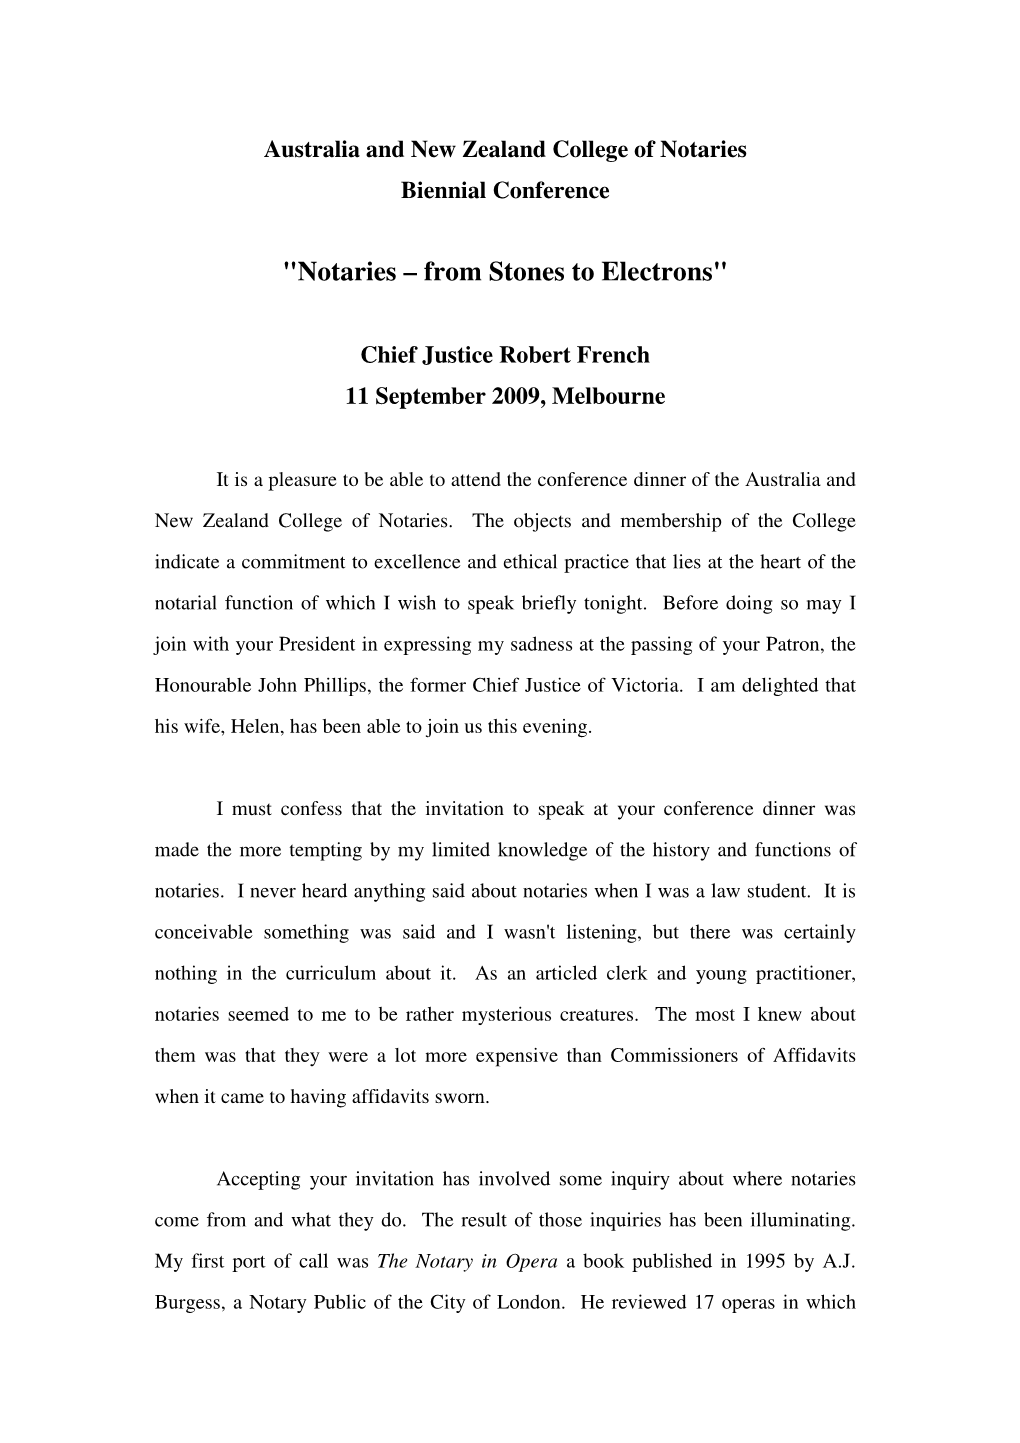 "Notaries – from Stones to Electrons"